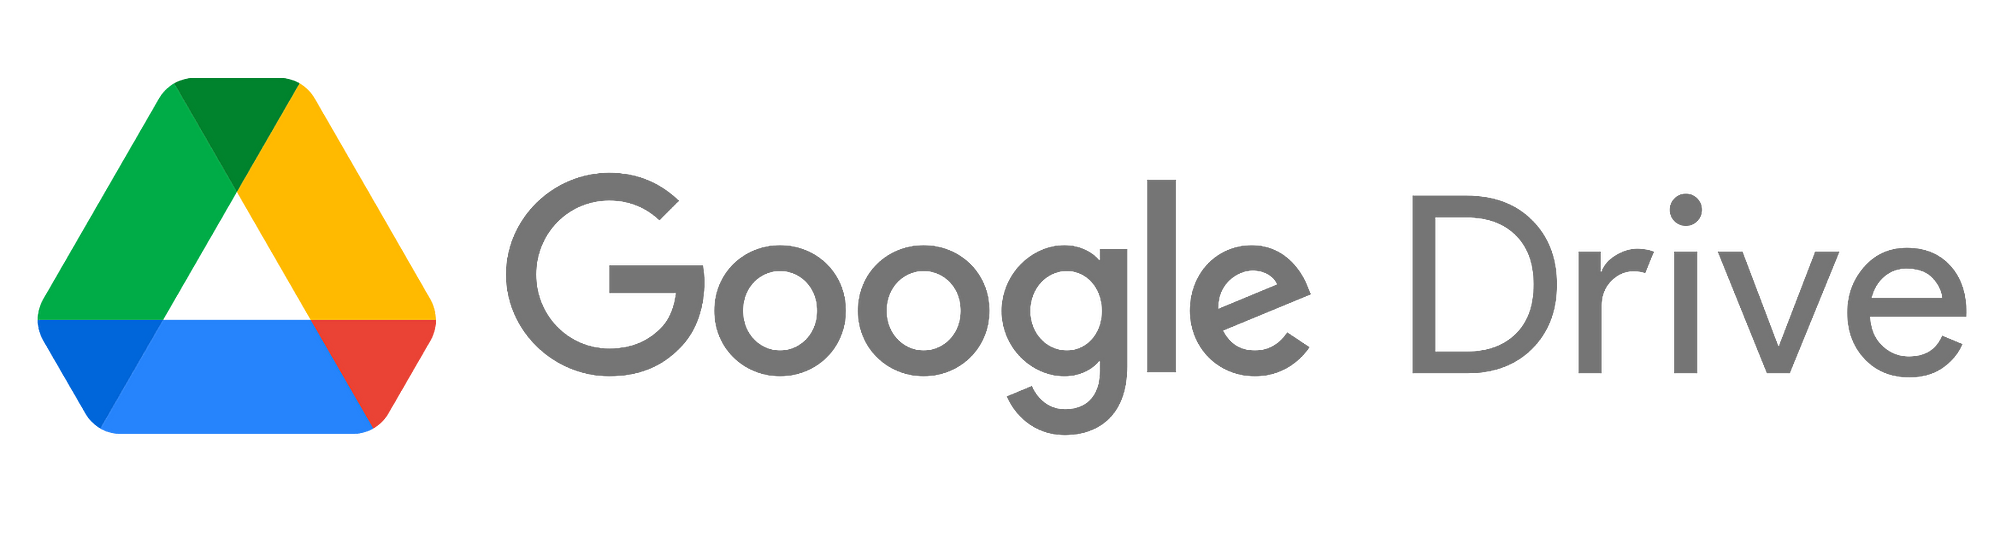 Secured Signing for Google Drive